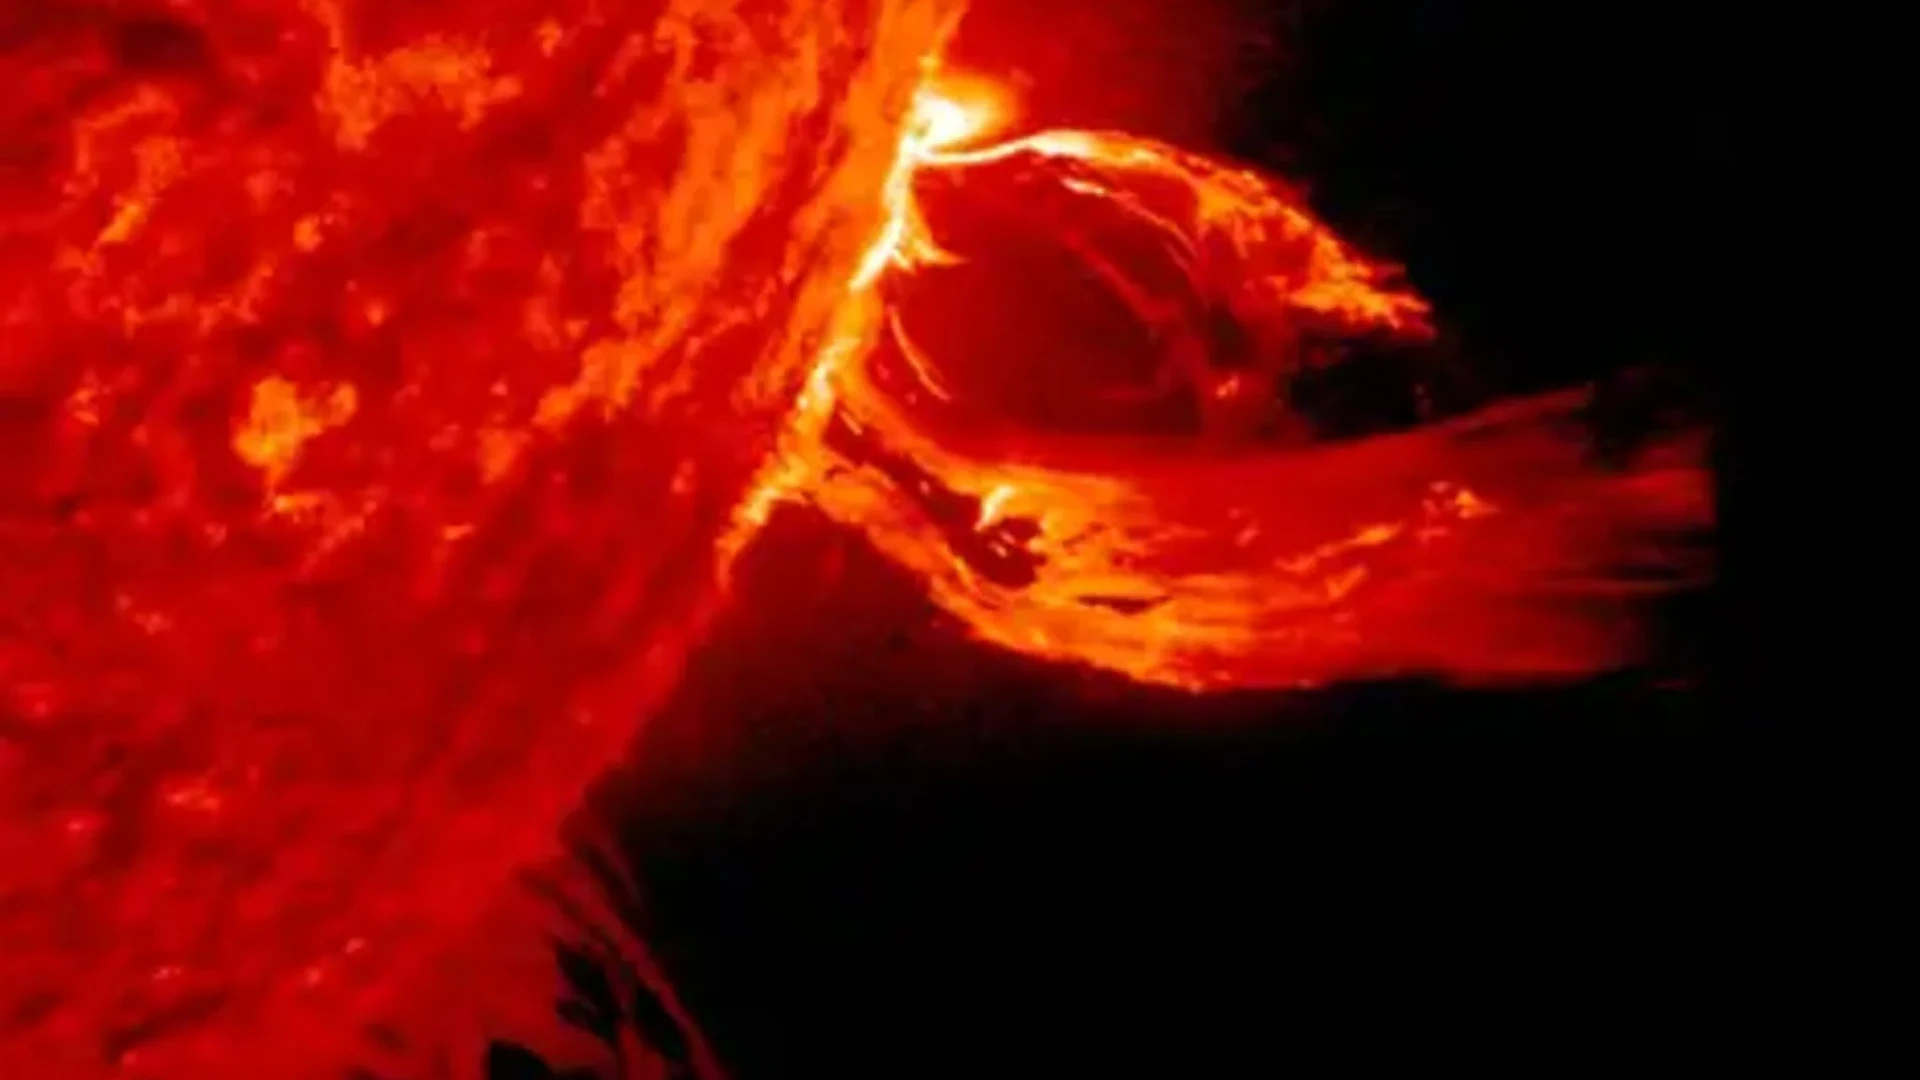 Shut Your Windows! A Geomagnetic Storm Caused By The Sun Is On Its Way